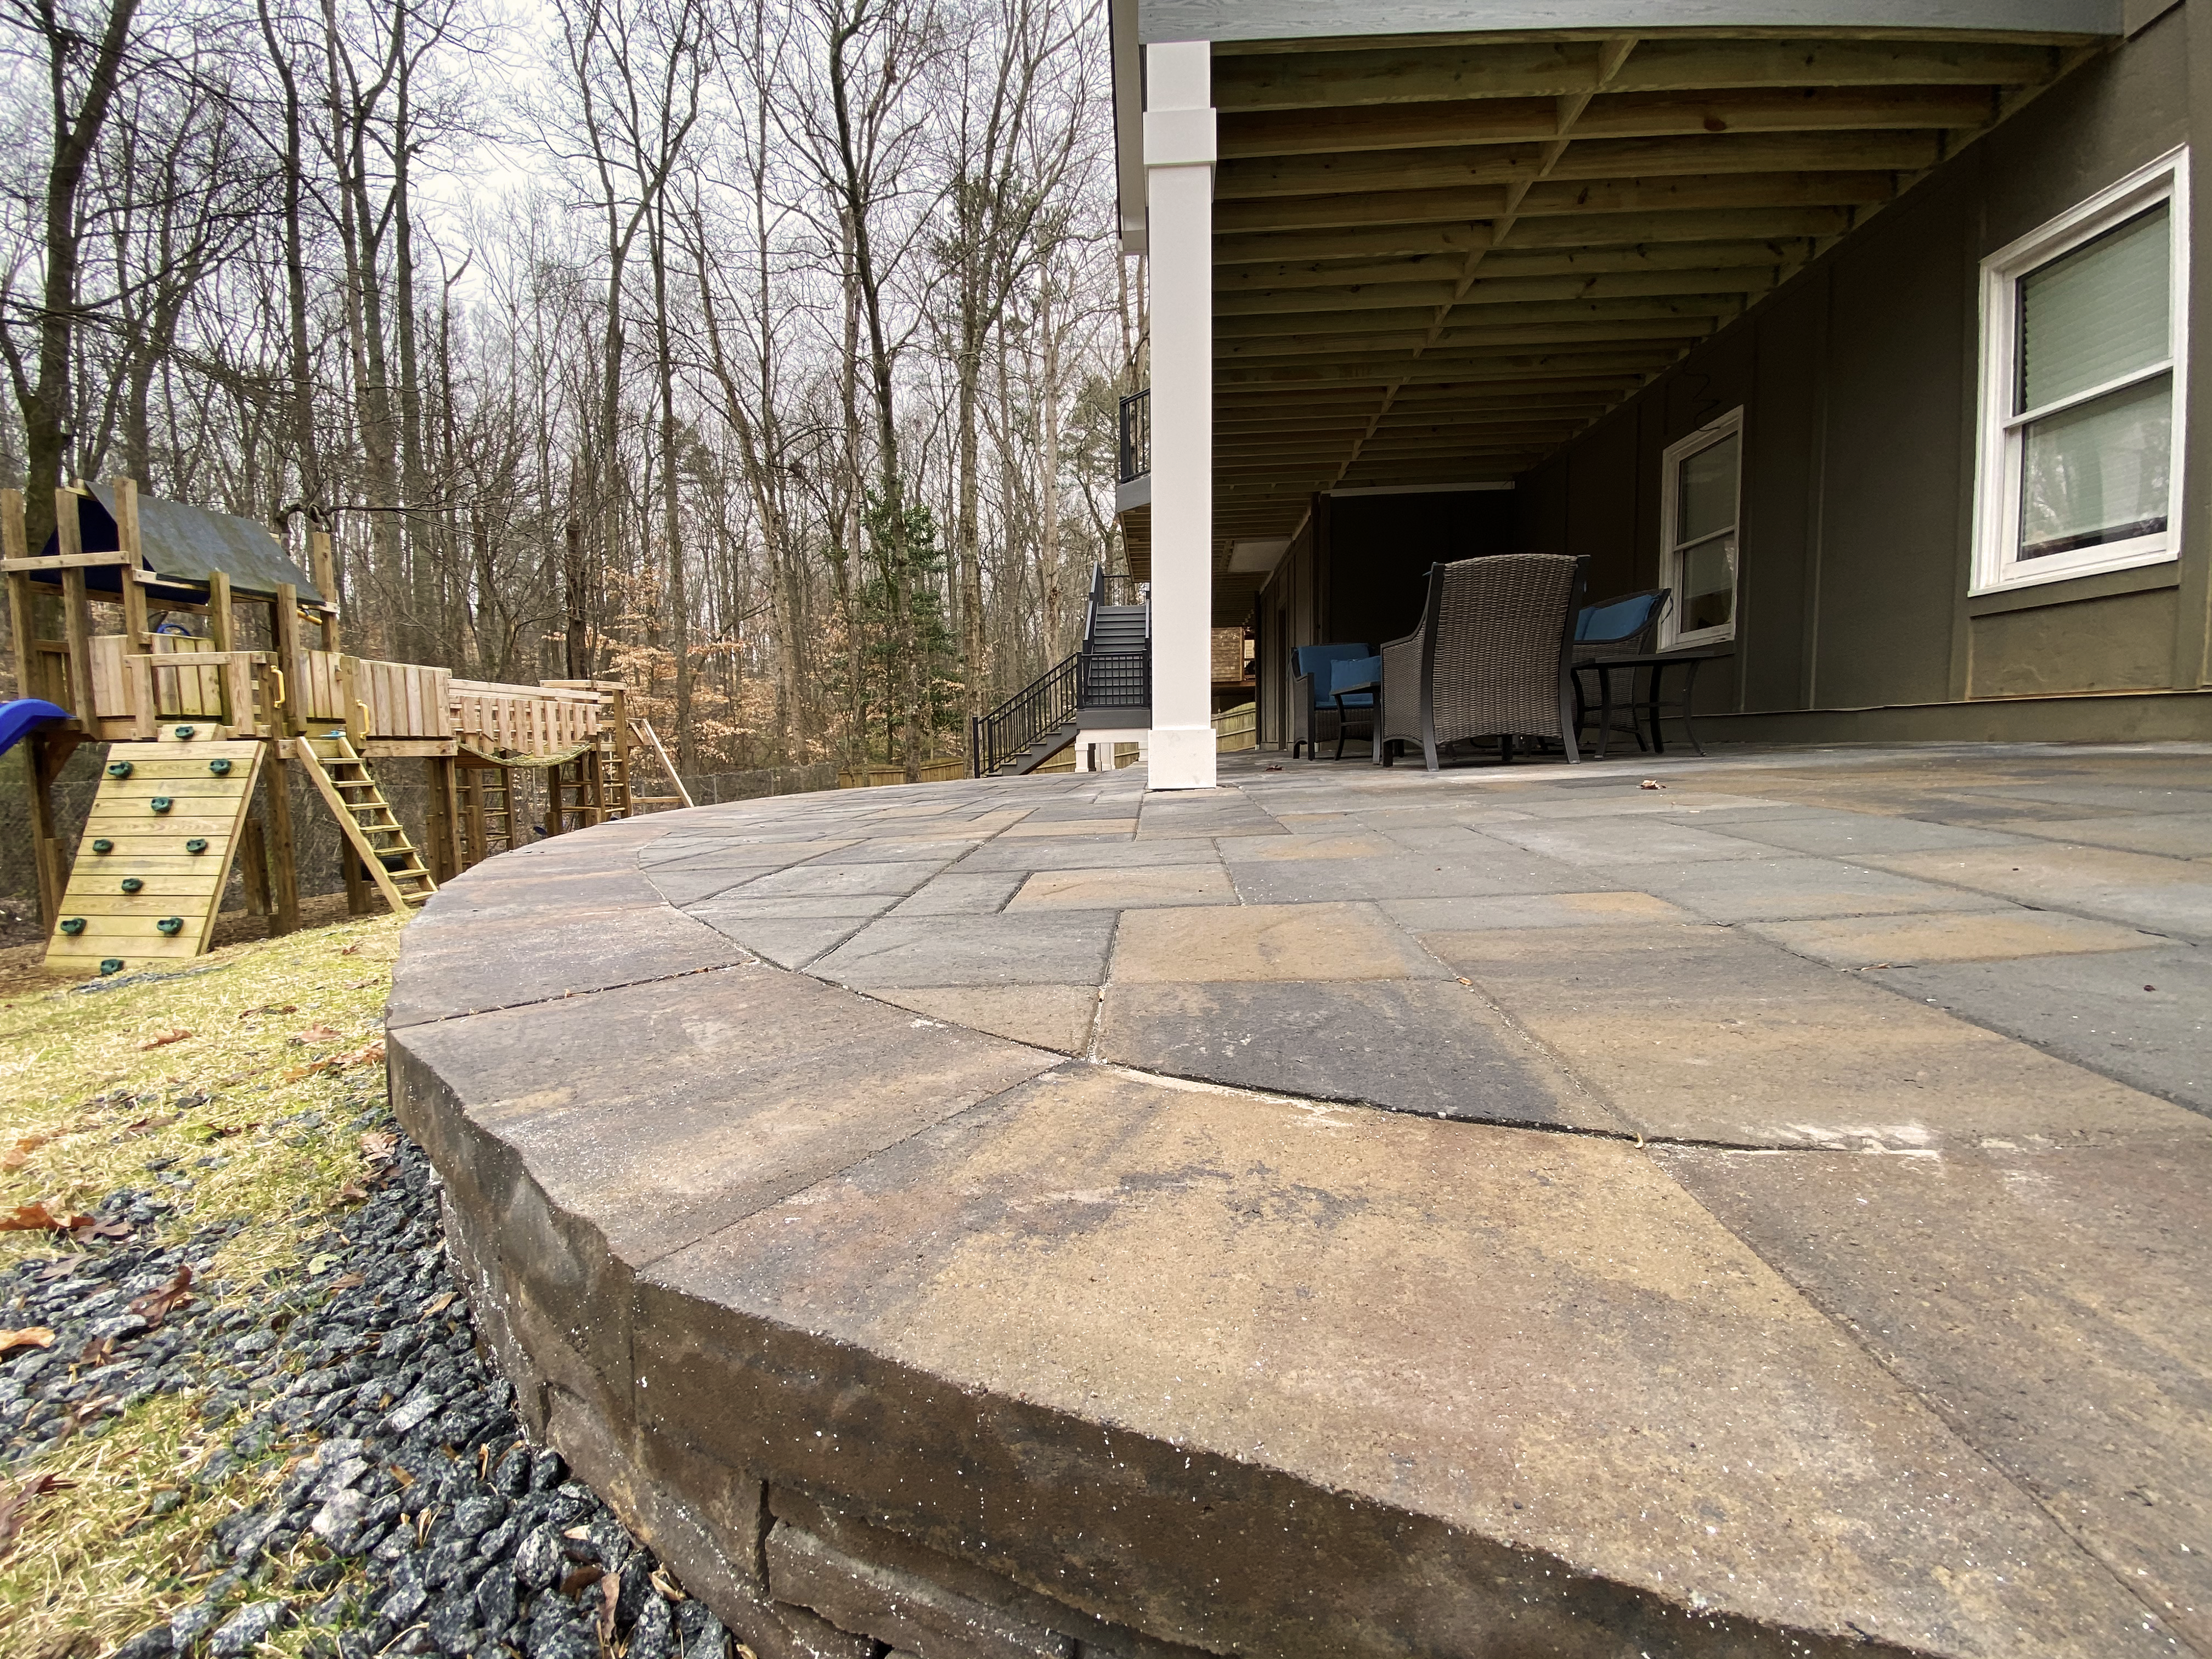 Covered Belgard paver patio with natural color blends